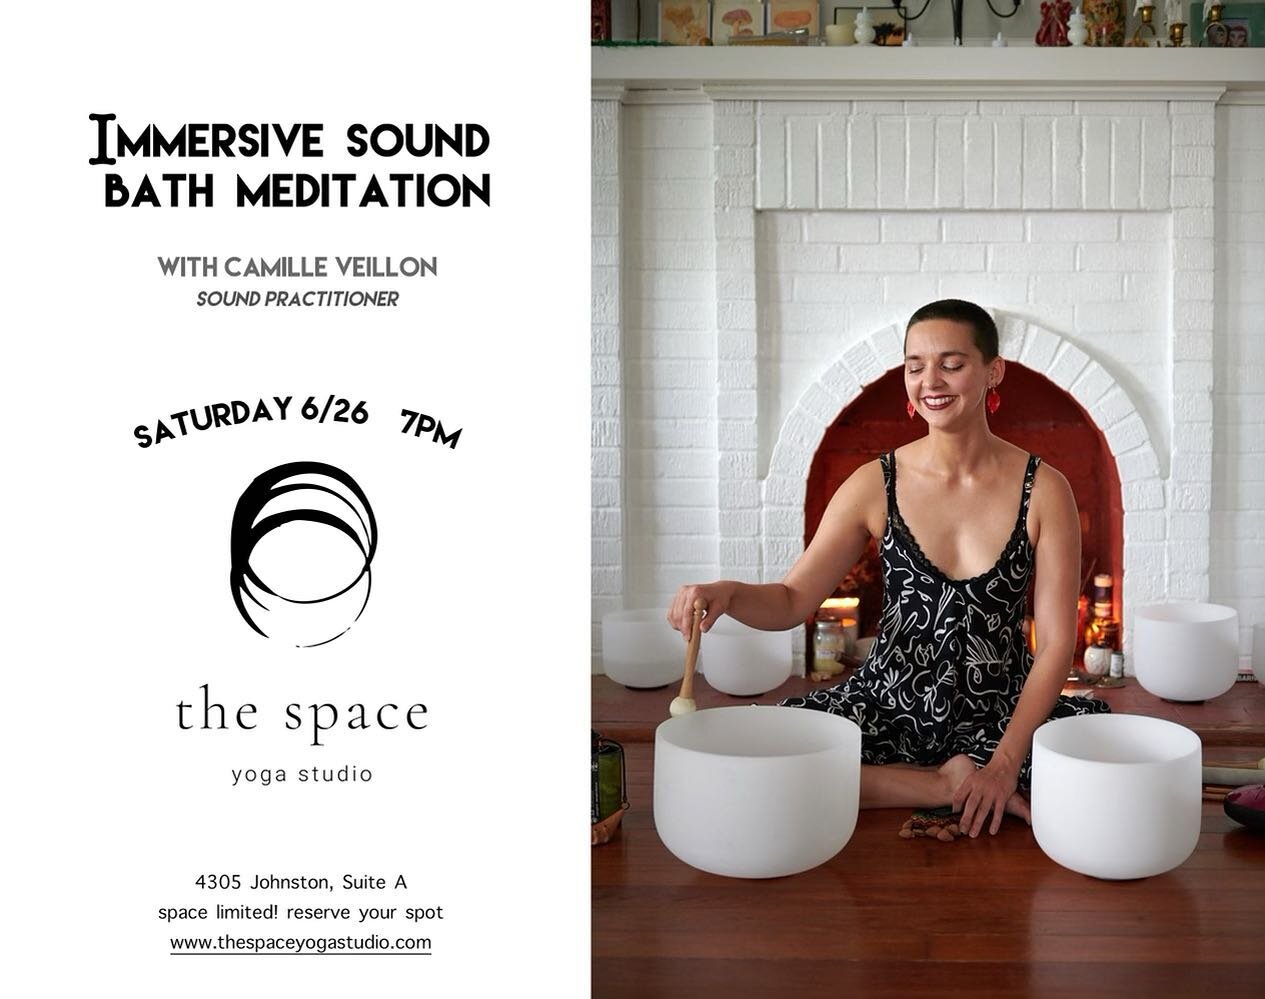 We are so excited to host an 
Immersive Sound Bath Meditation with @camilleveillon this Saturday evening!! Sign up on MindBody while there are still spots available! Only $25 per person!

Welcome to an opportunity to slow down.
To breathe.
To care fo